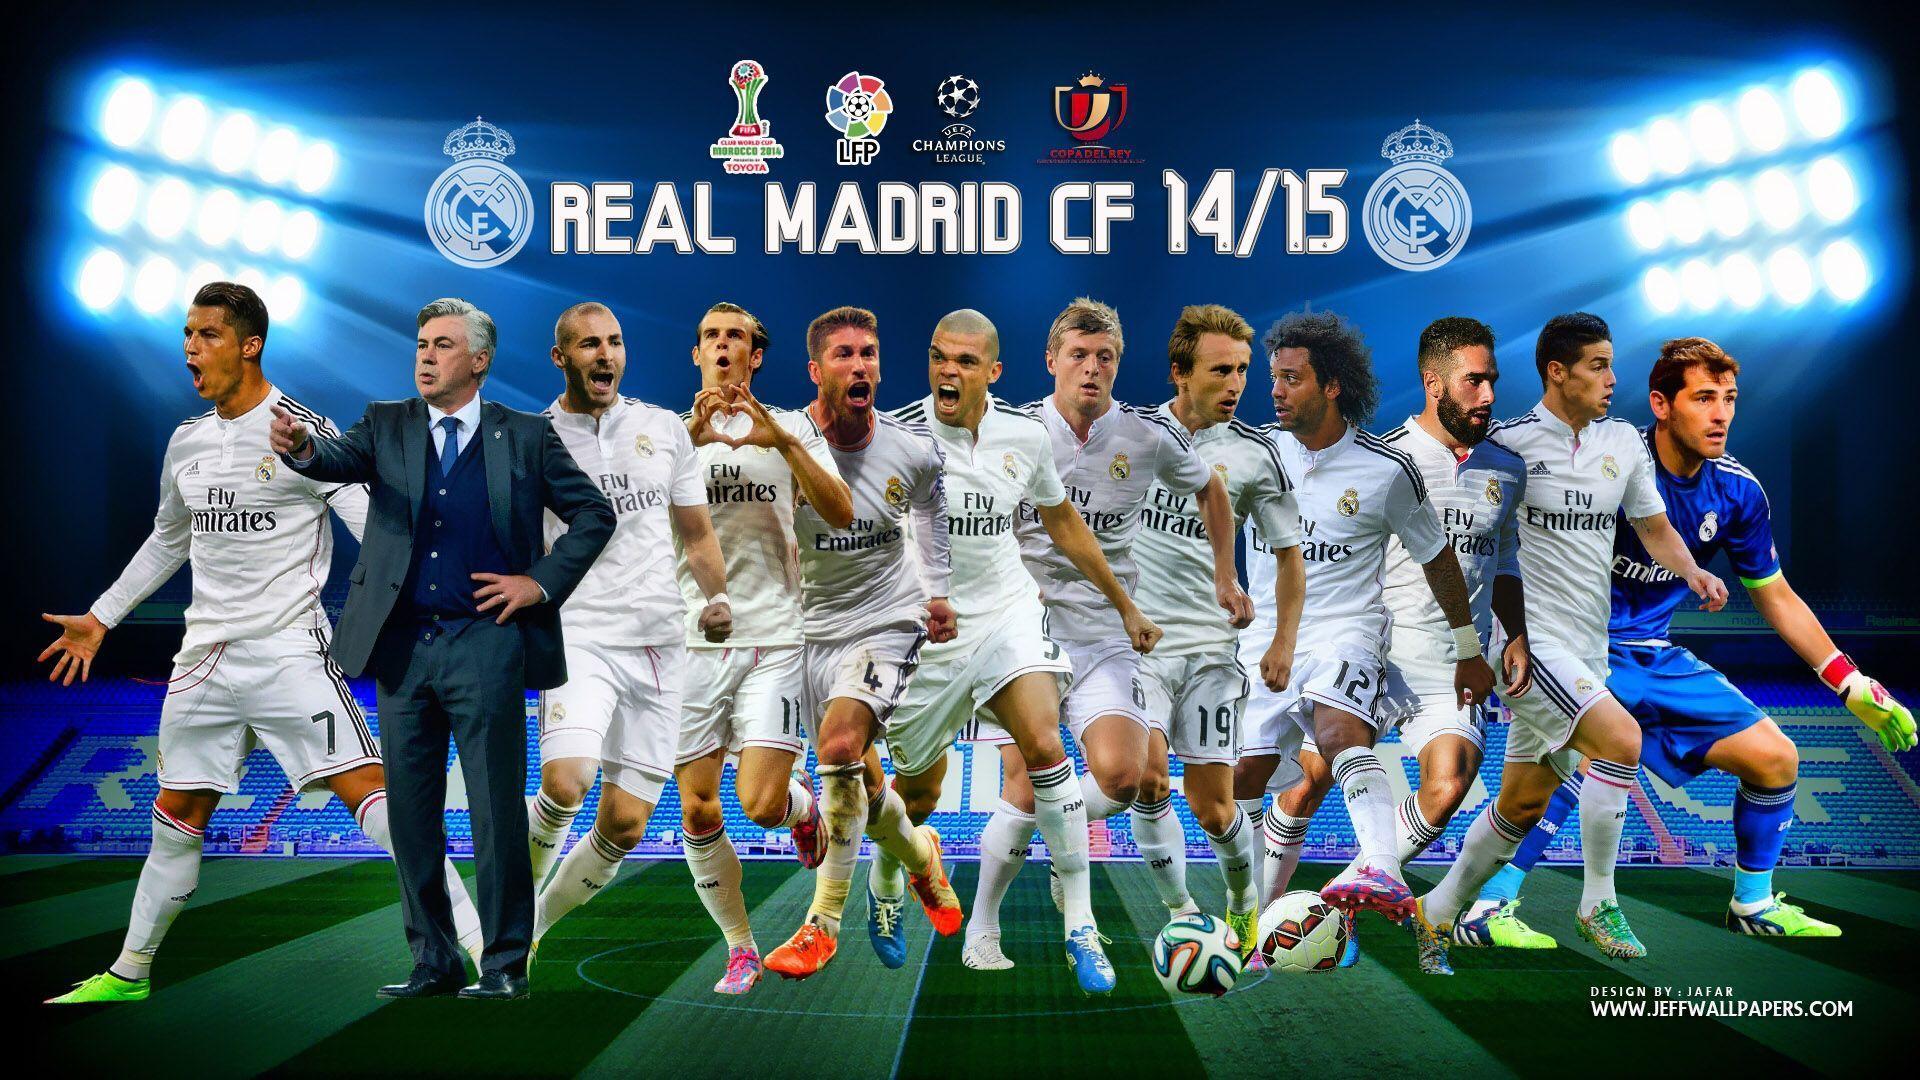 Full Hd Wallpaper Of Real Madrid 2017 Backgrounds Pics - Real Madrid Team 2017 - HD Wallpaper 